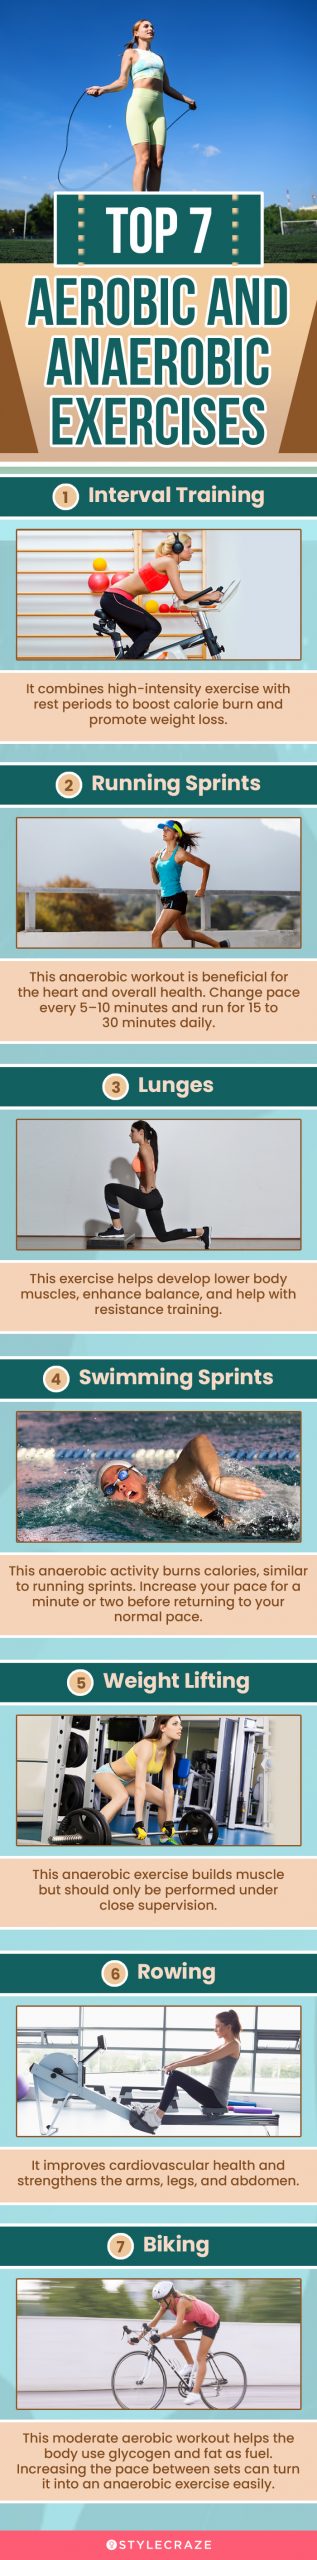 top 7 aerobic and anaerobic exercises (infographic)